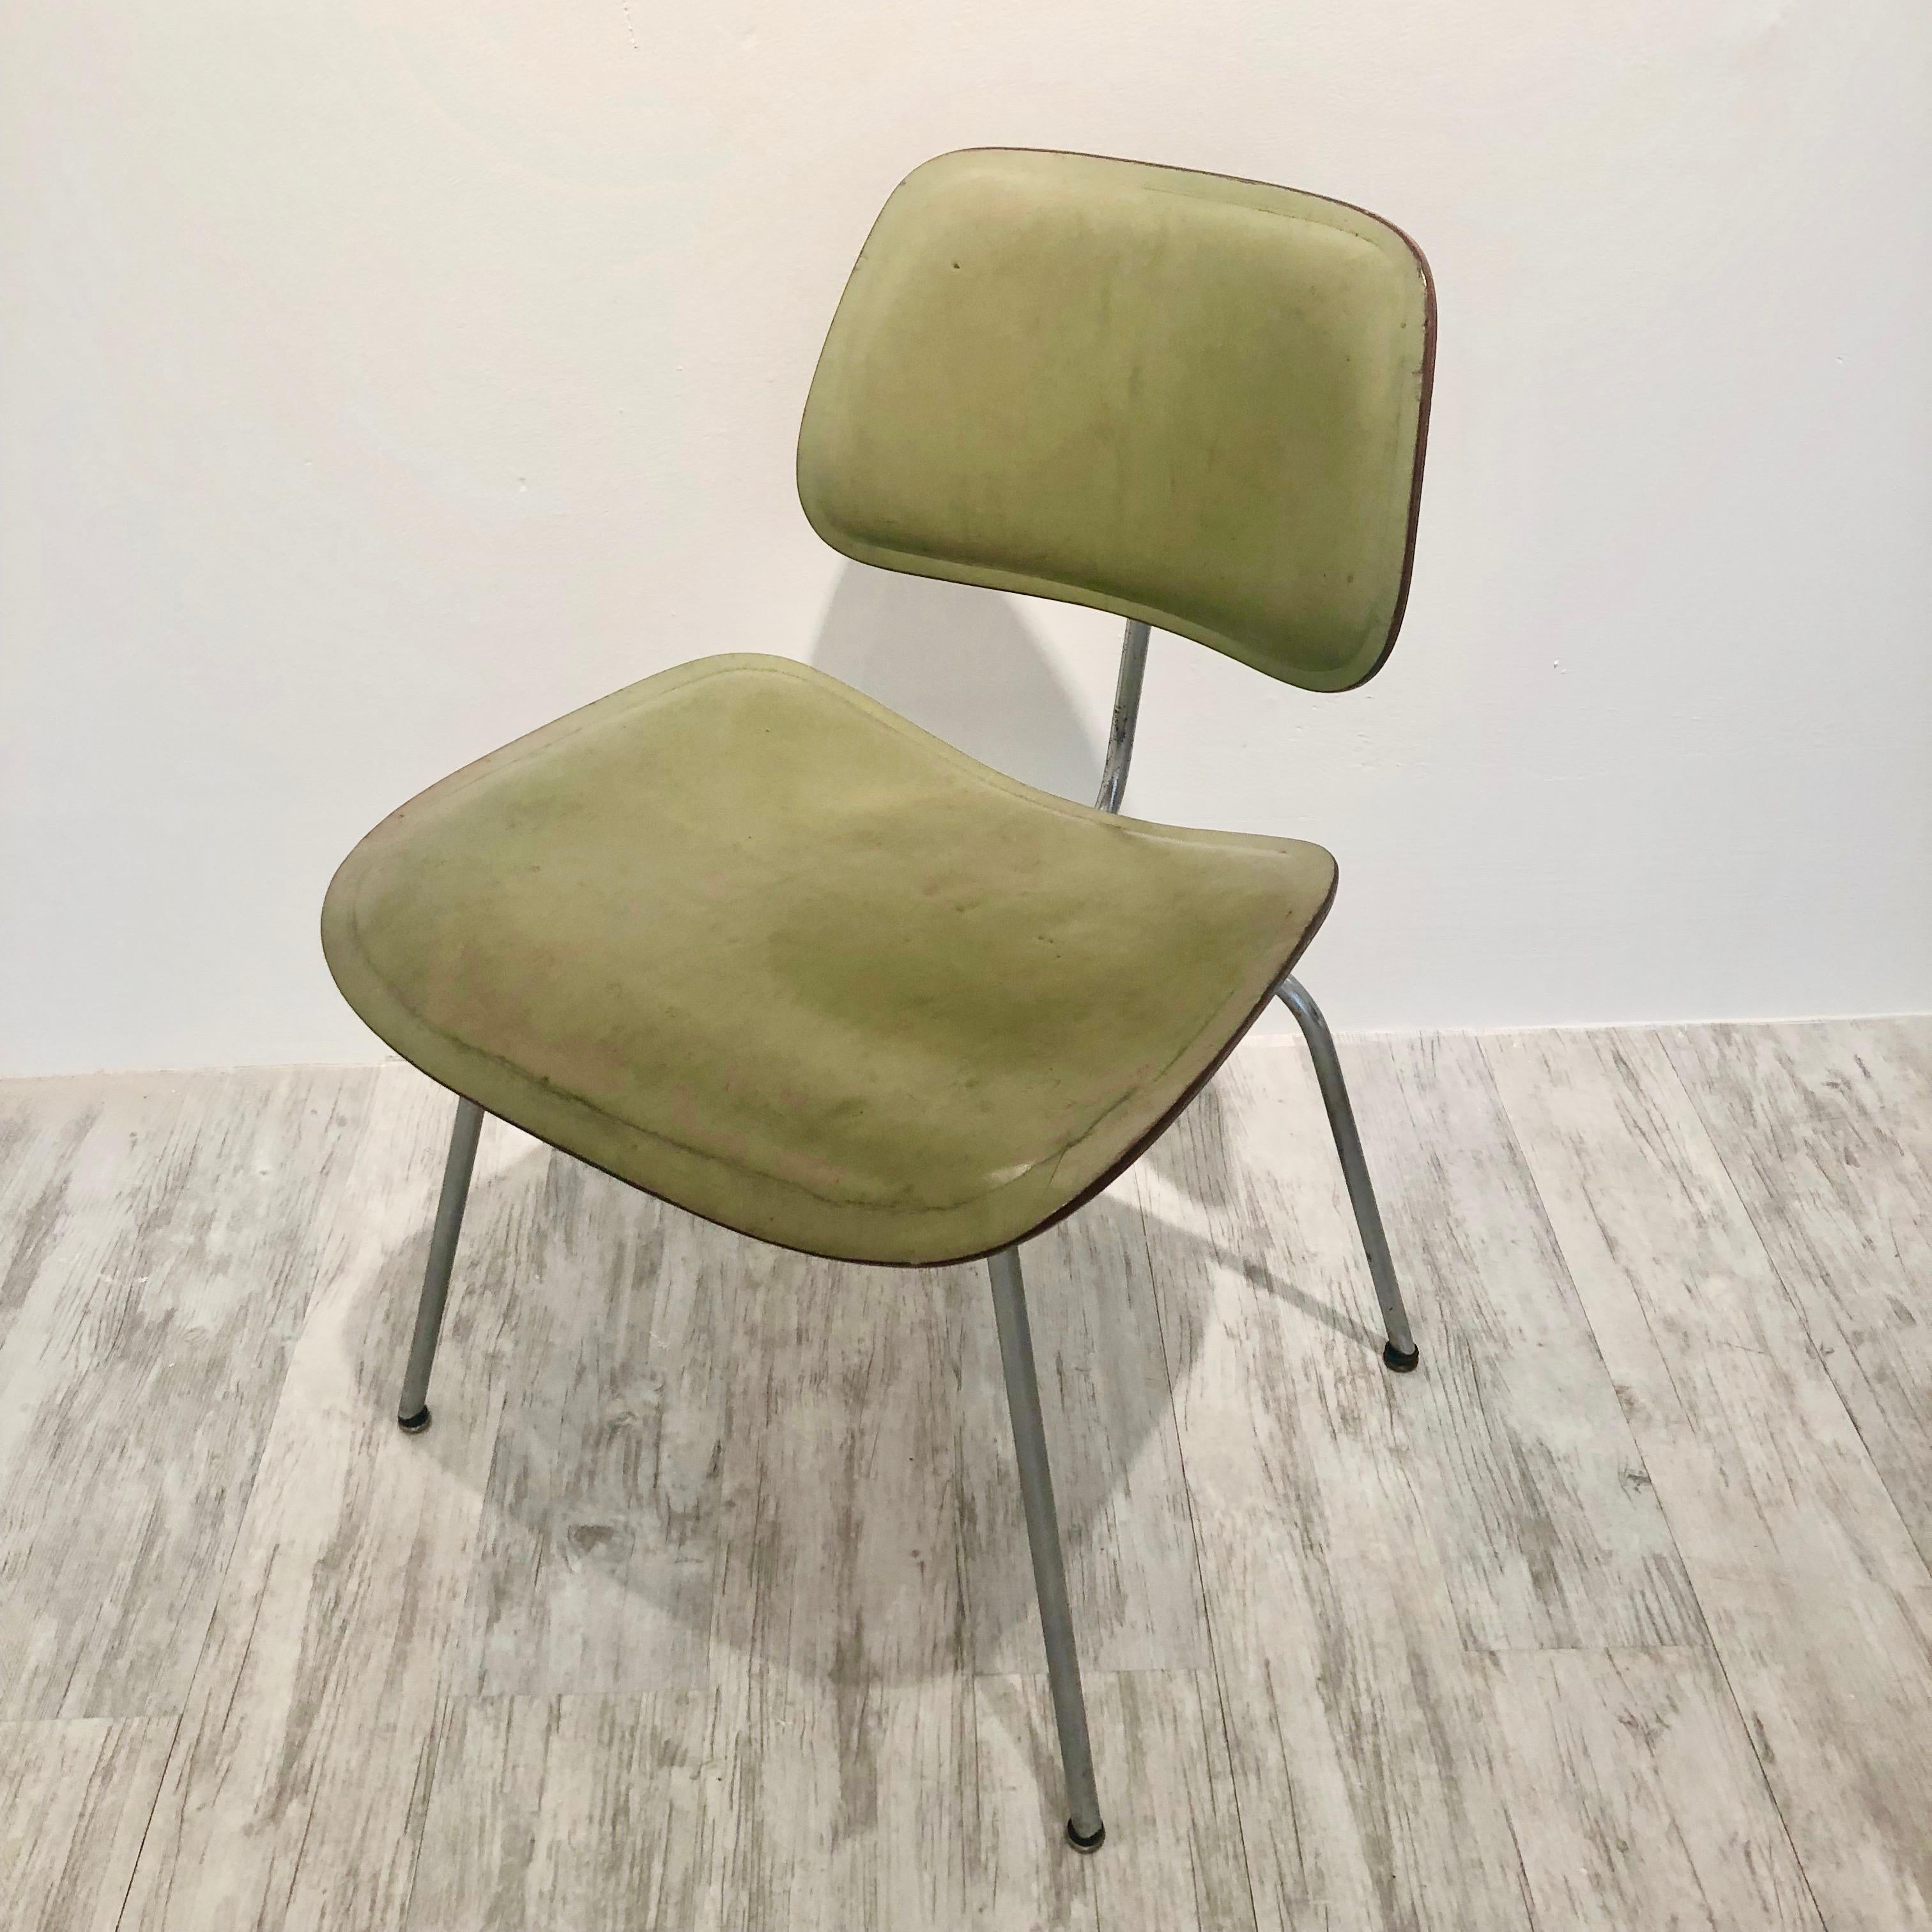 ONE OF A KIND CUSTOM SAGE GREEN LEATHER DCM CHAIR - Art by Charles and Ray Eames